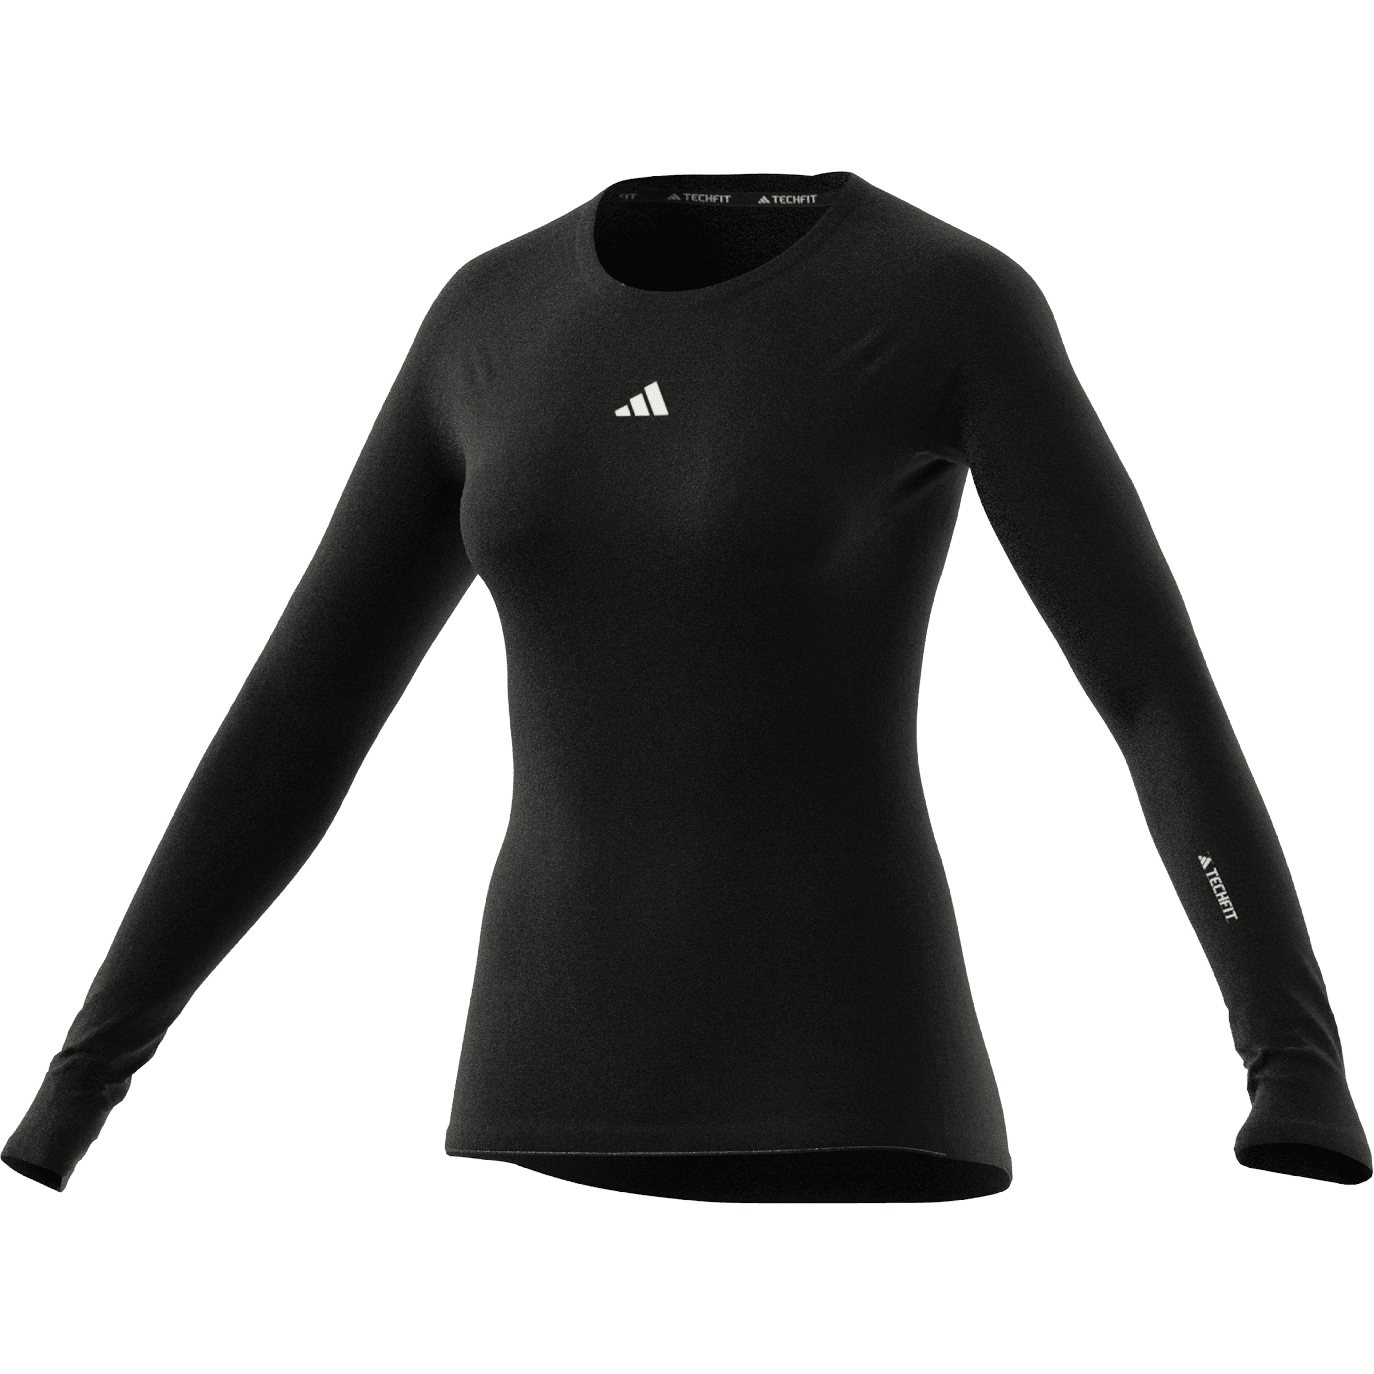 Picture of adidas Techfit Training Long-Sleeve Top Women - black HY3214